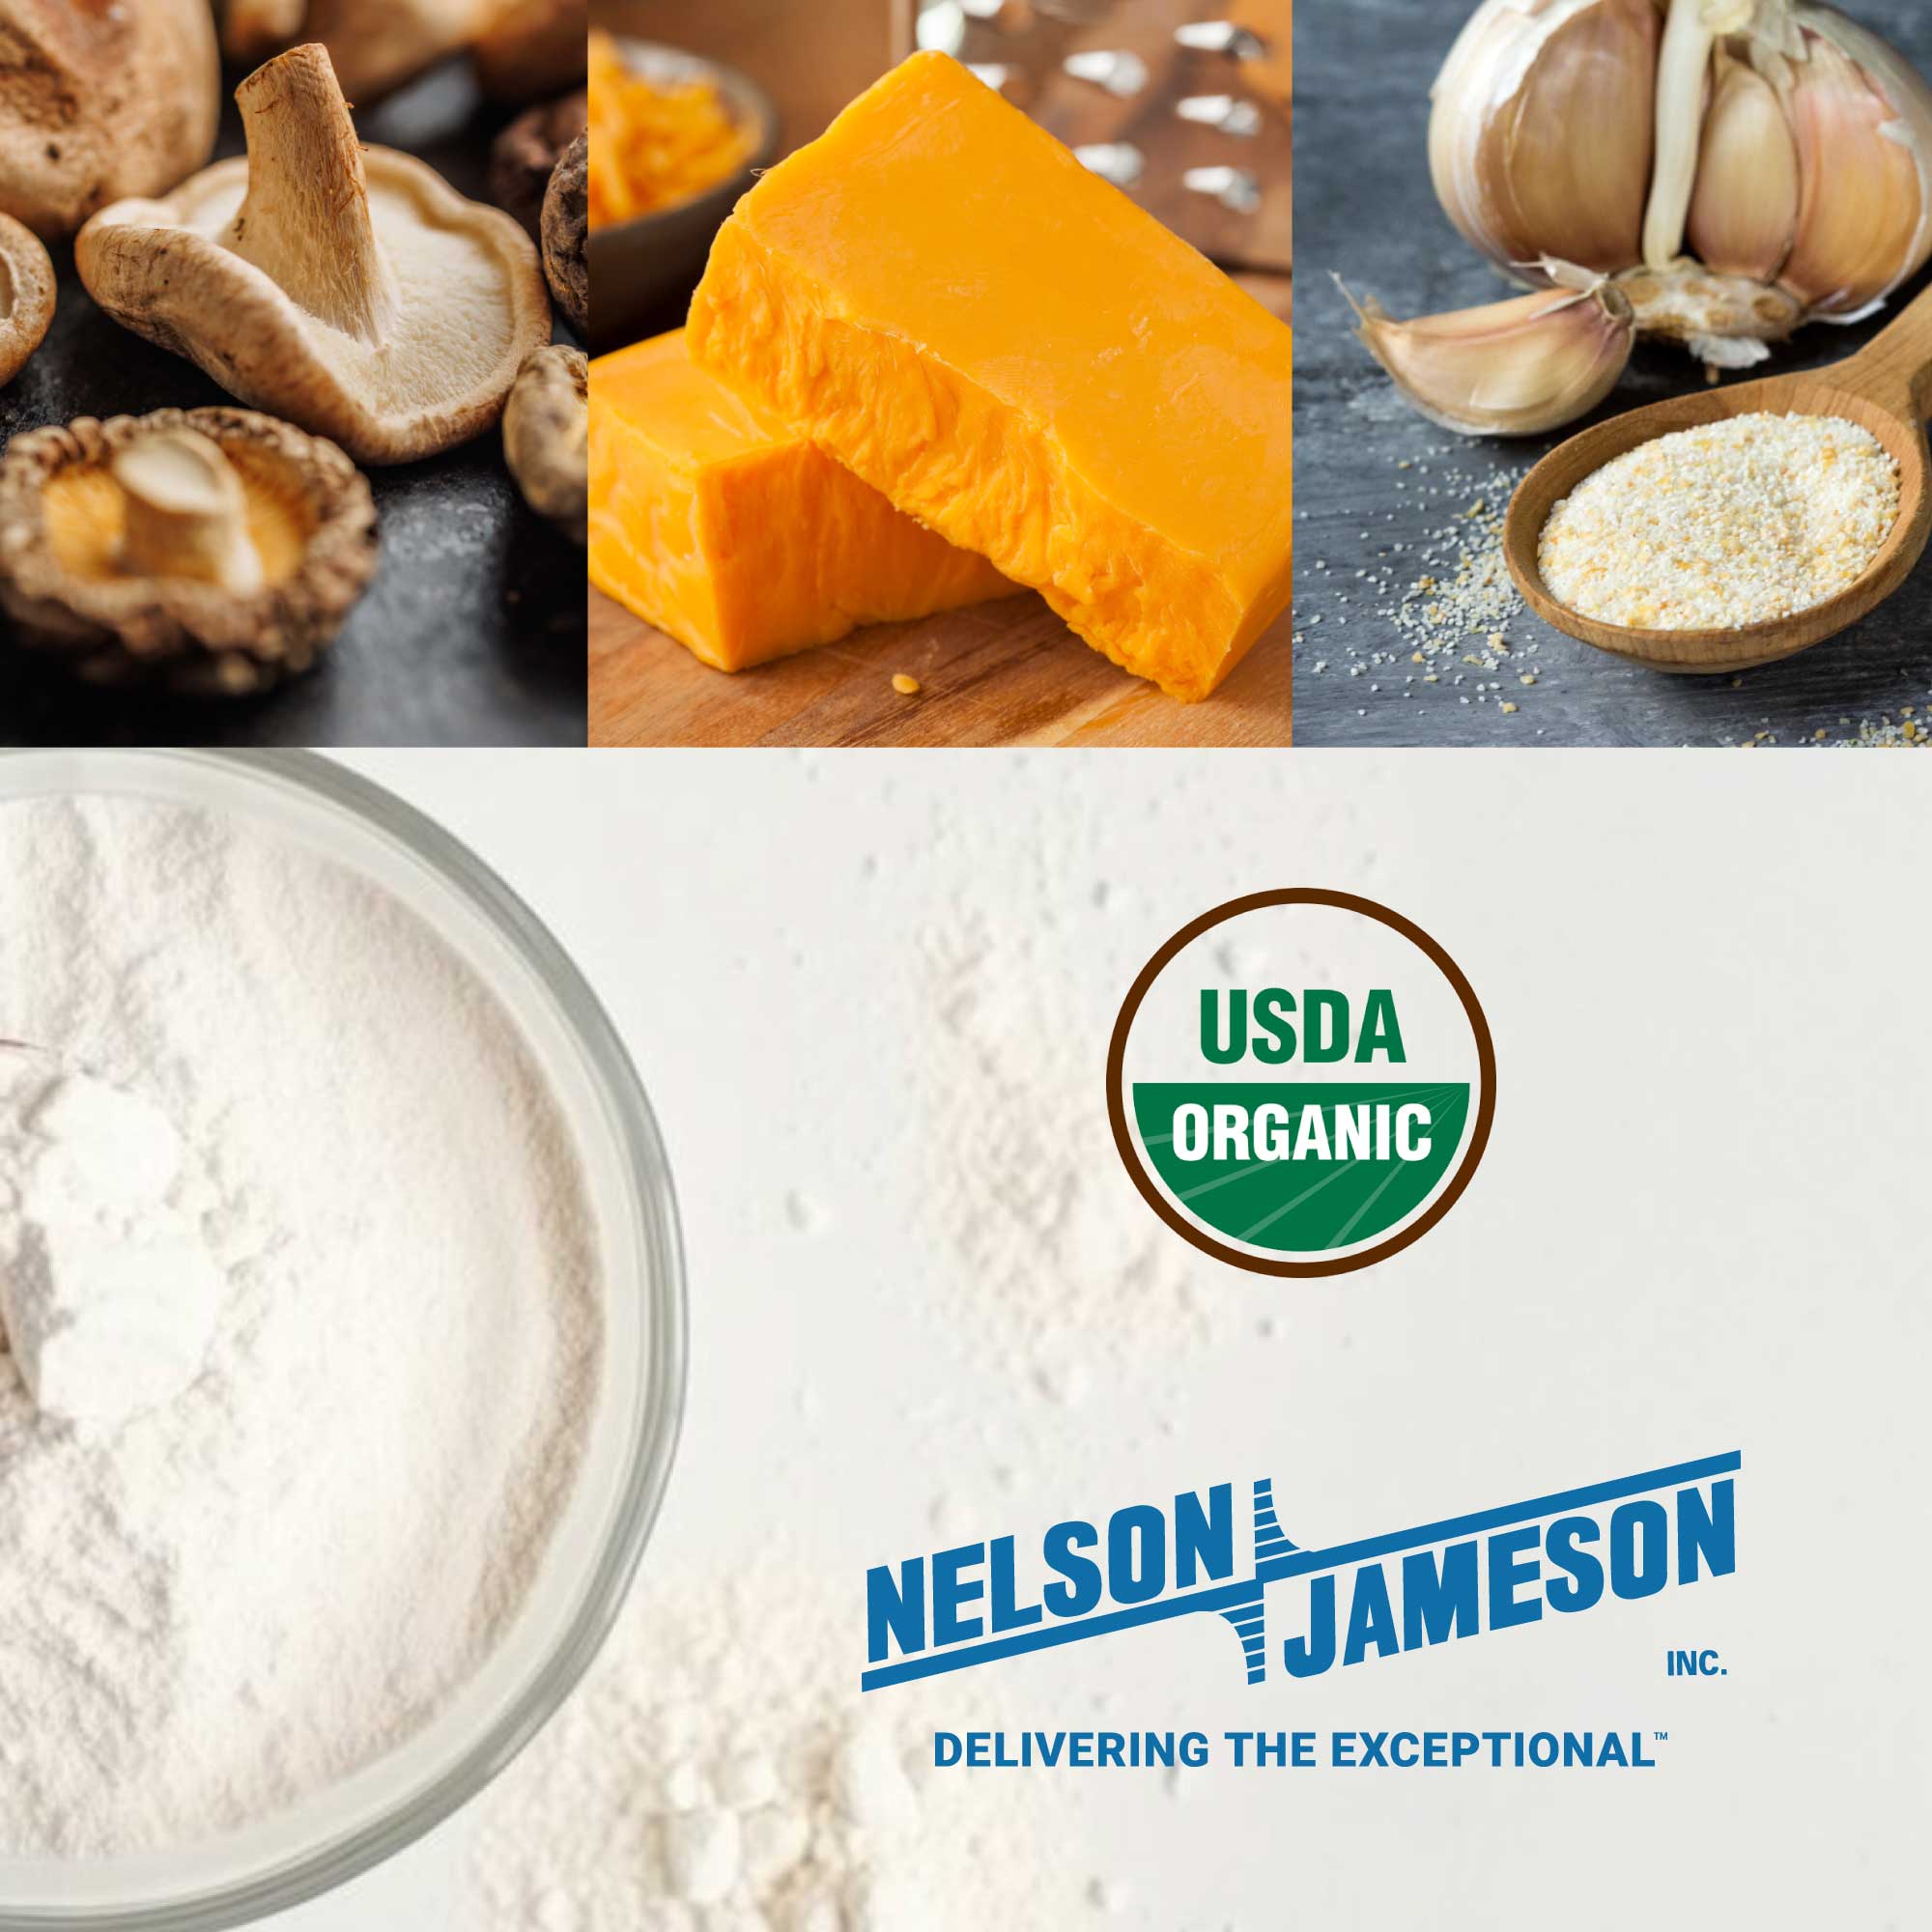 Food Processing Distributor Nelson-Jameson Receives Organic Certification